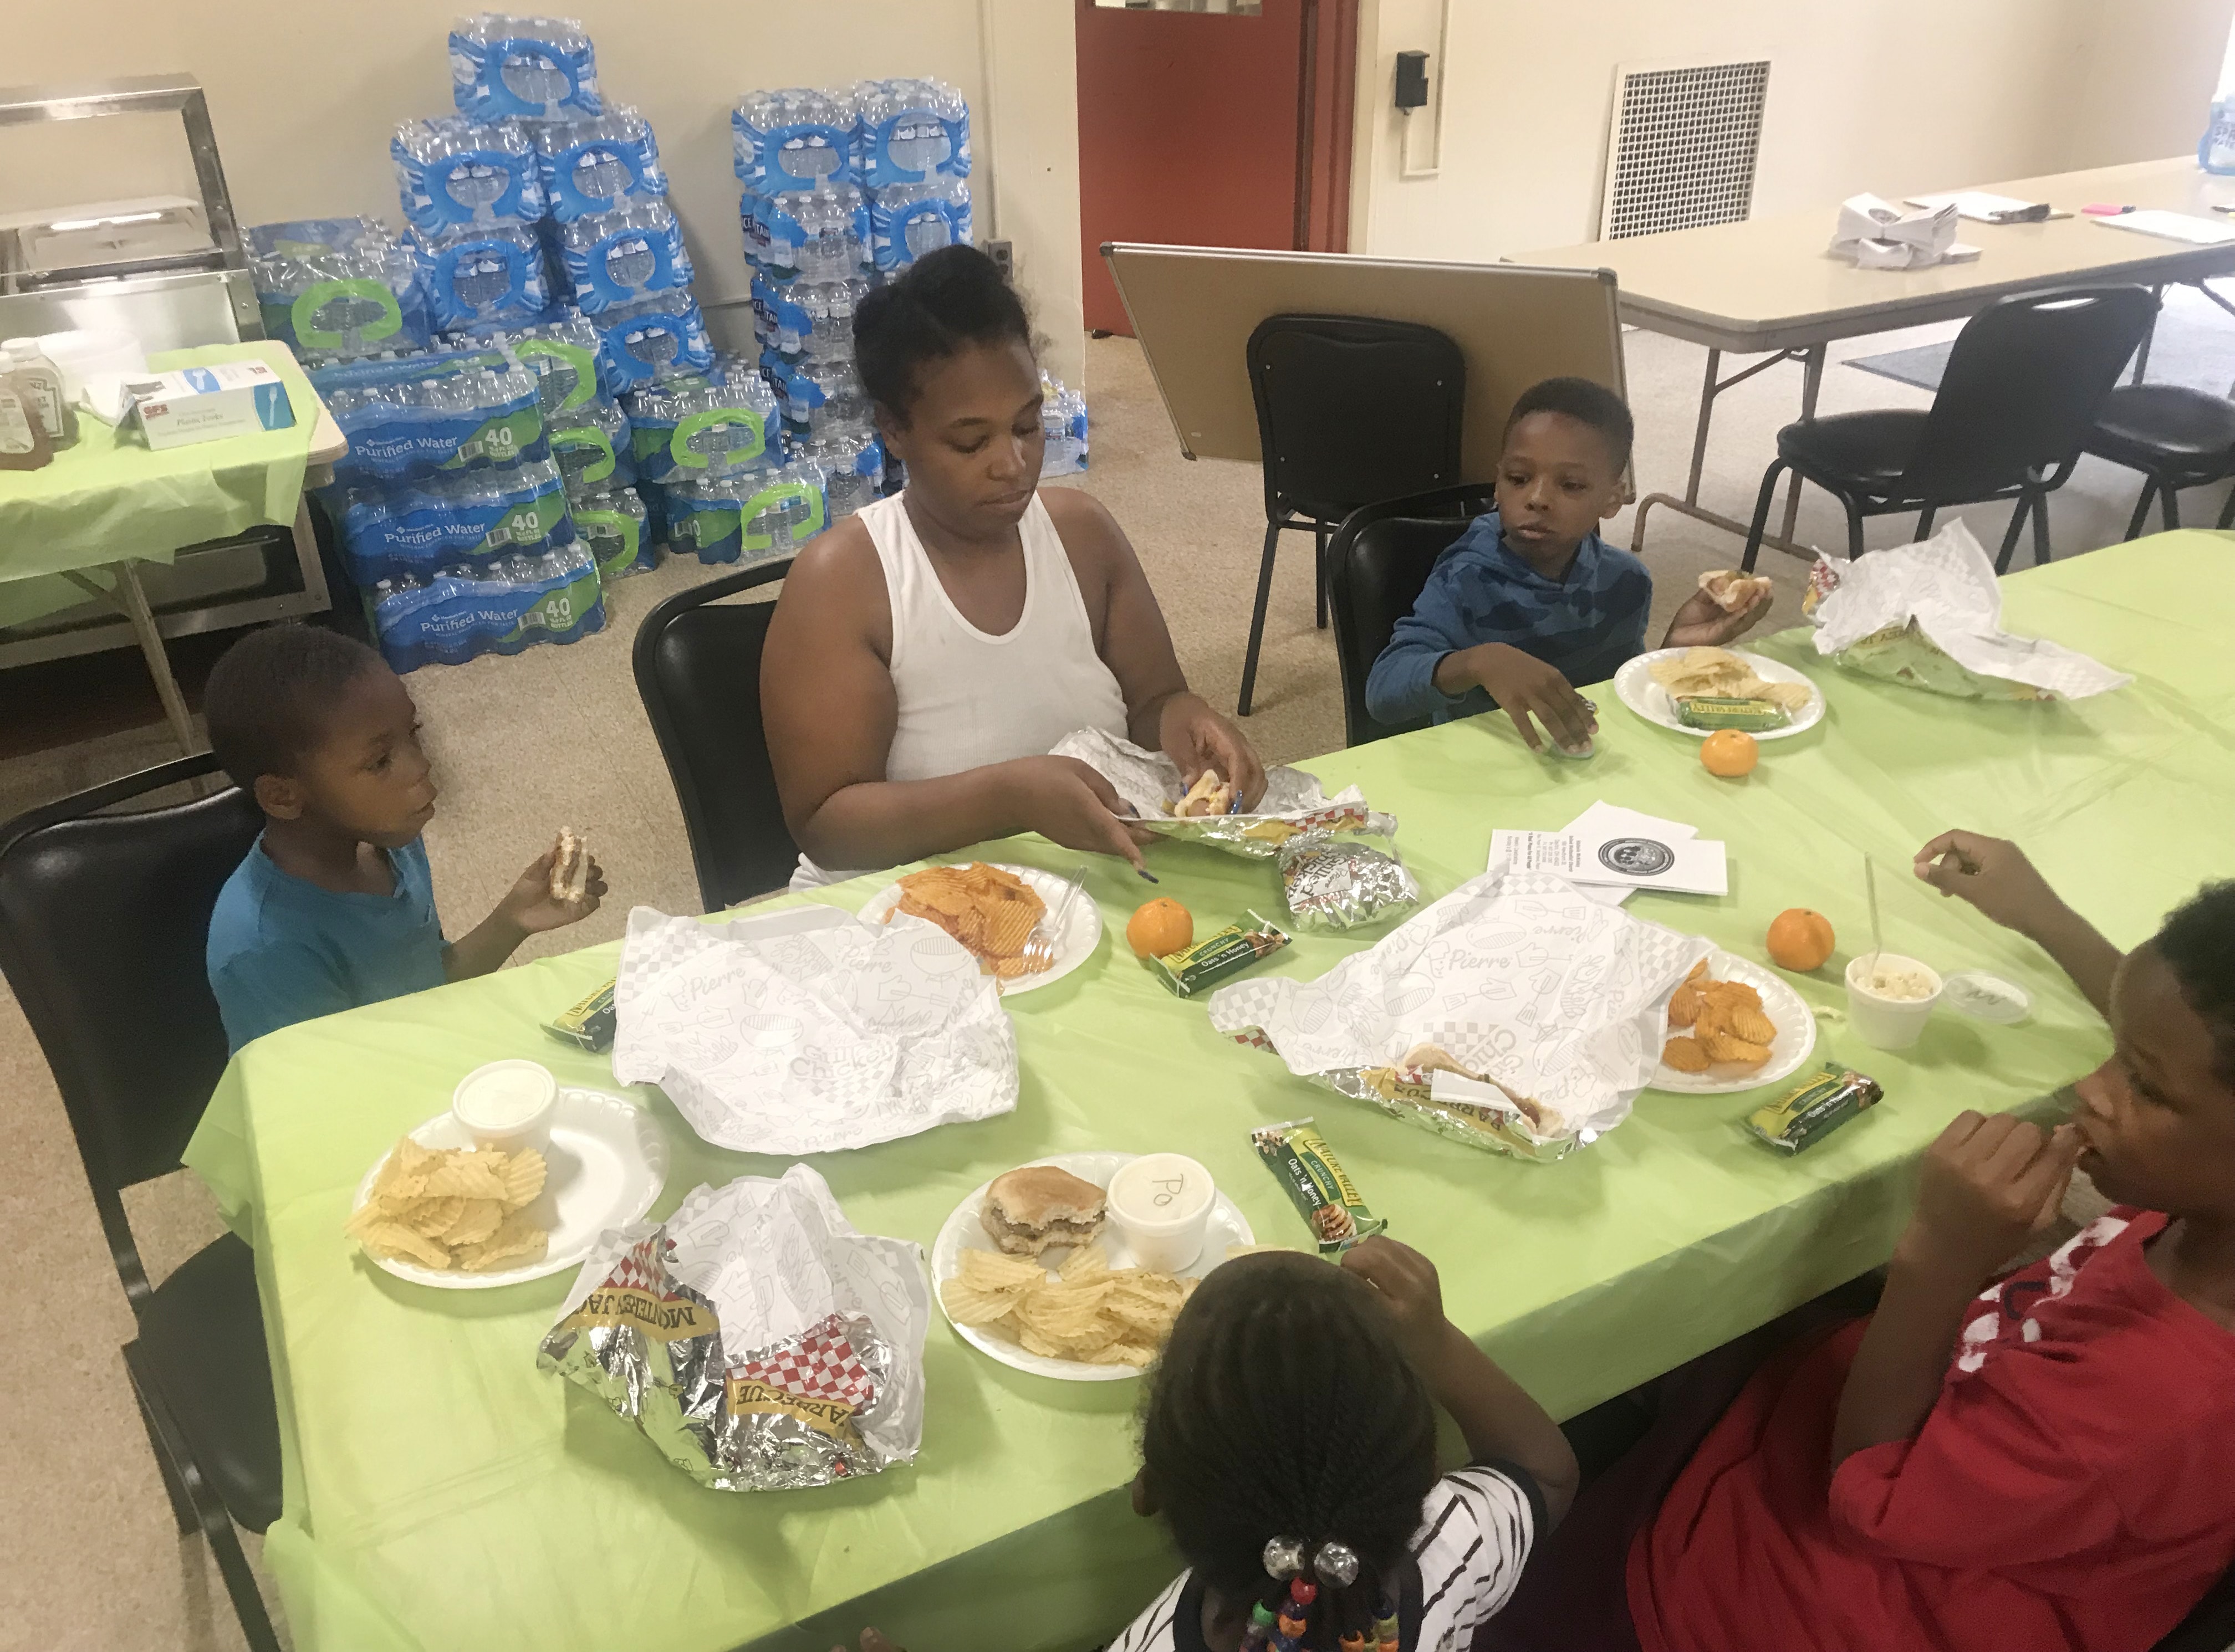 An unidentified woman eats with her children at McKinley United Methodist Church in Dayton, Ohio. The church offered shelter, hot food, free Wi-Fi, cases of water, electricity and clothes. Photo by the Rev. Peter Edward Matthews.